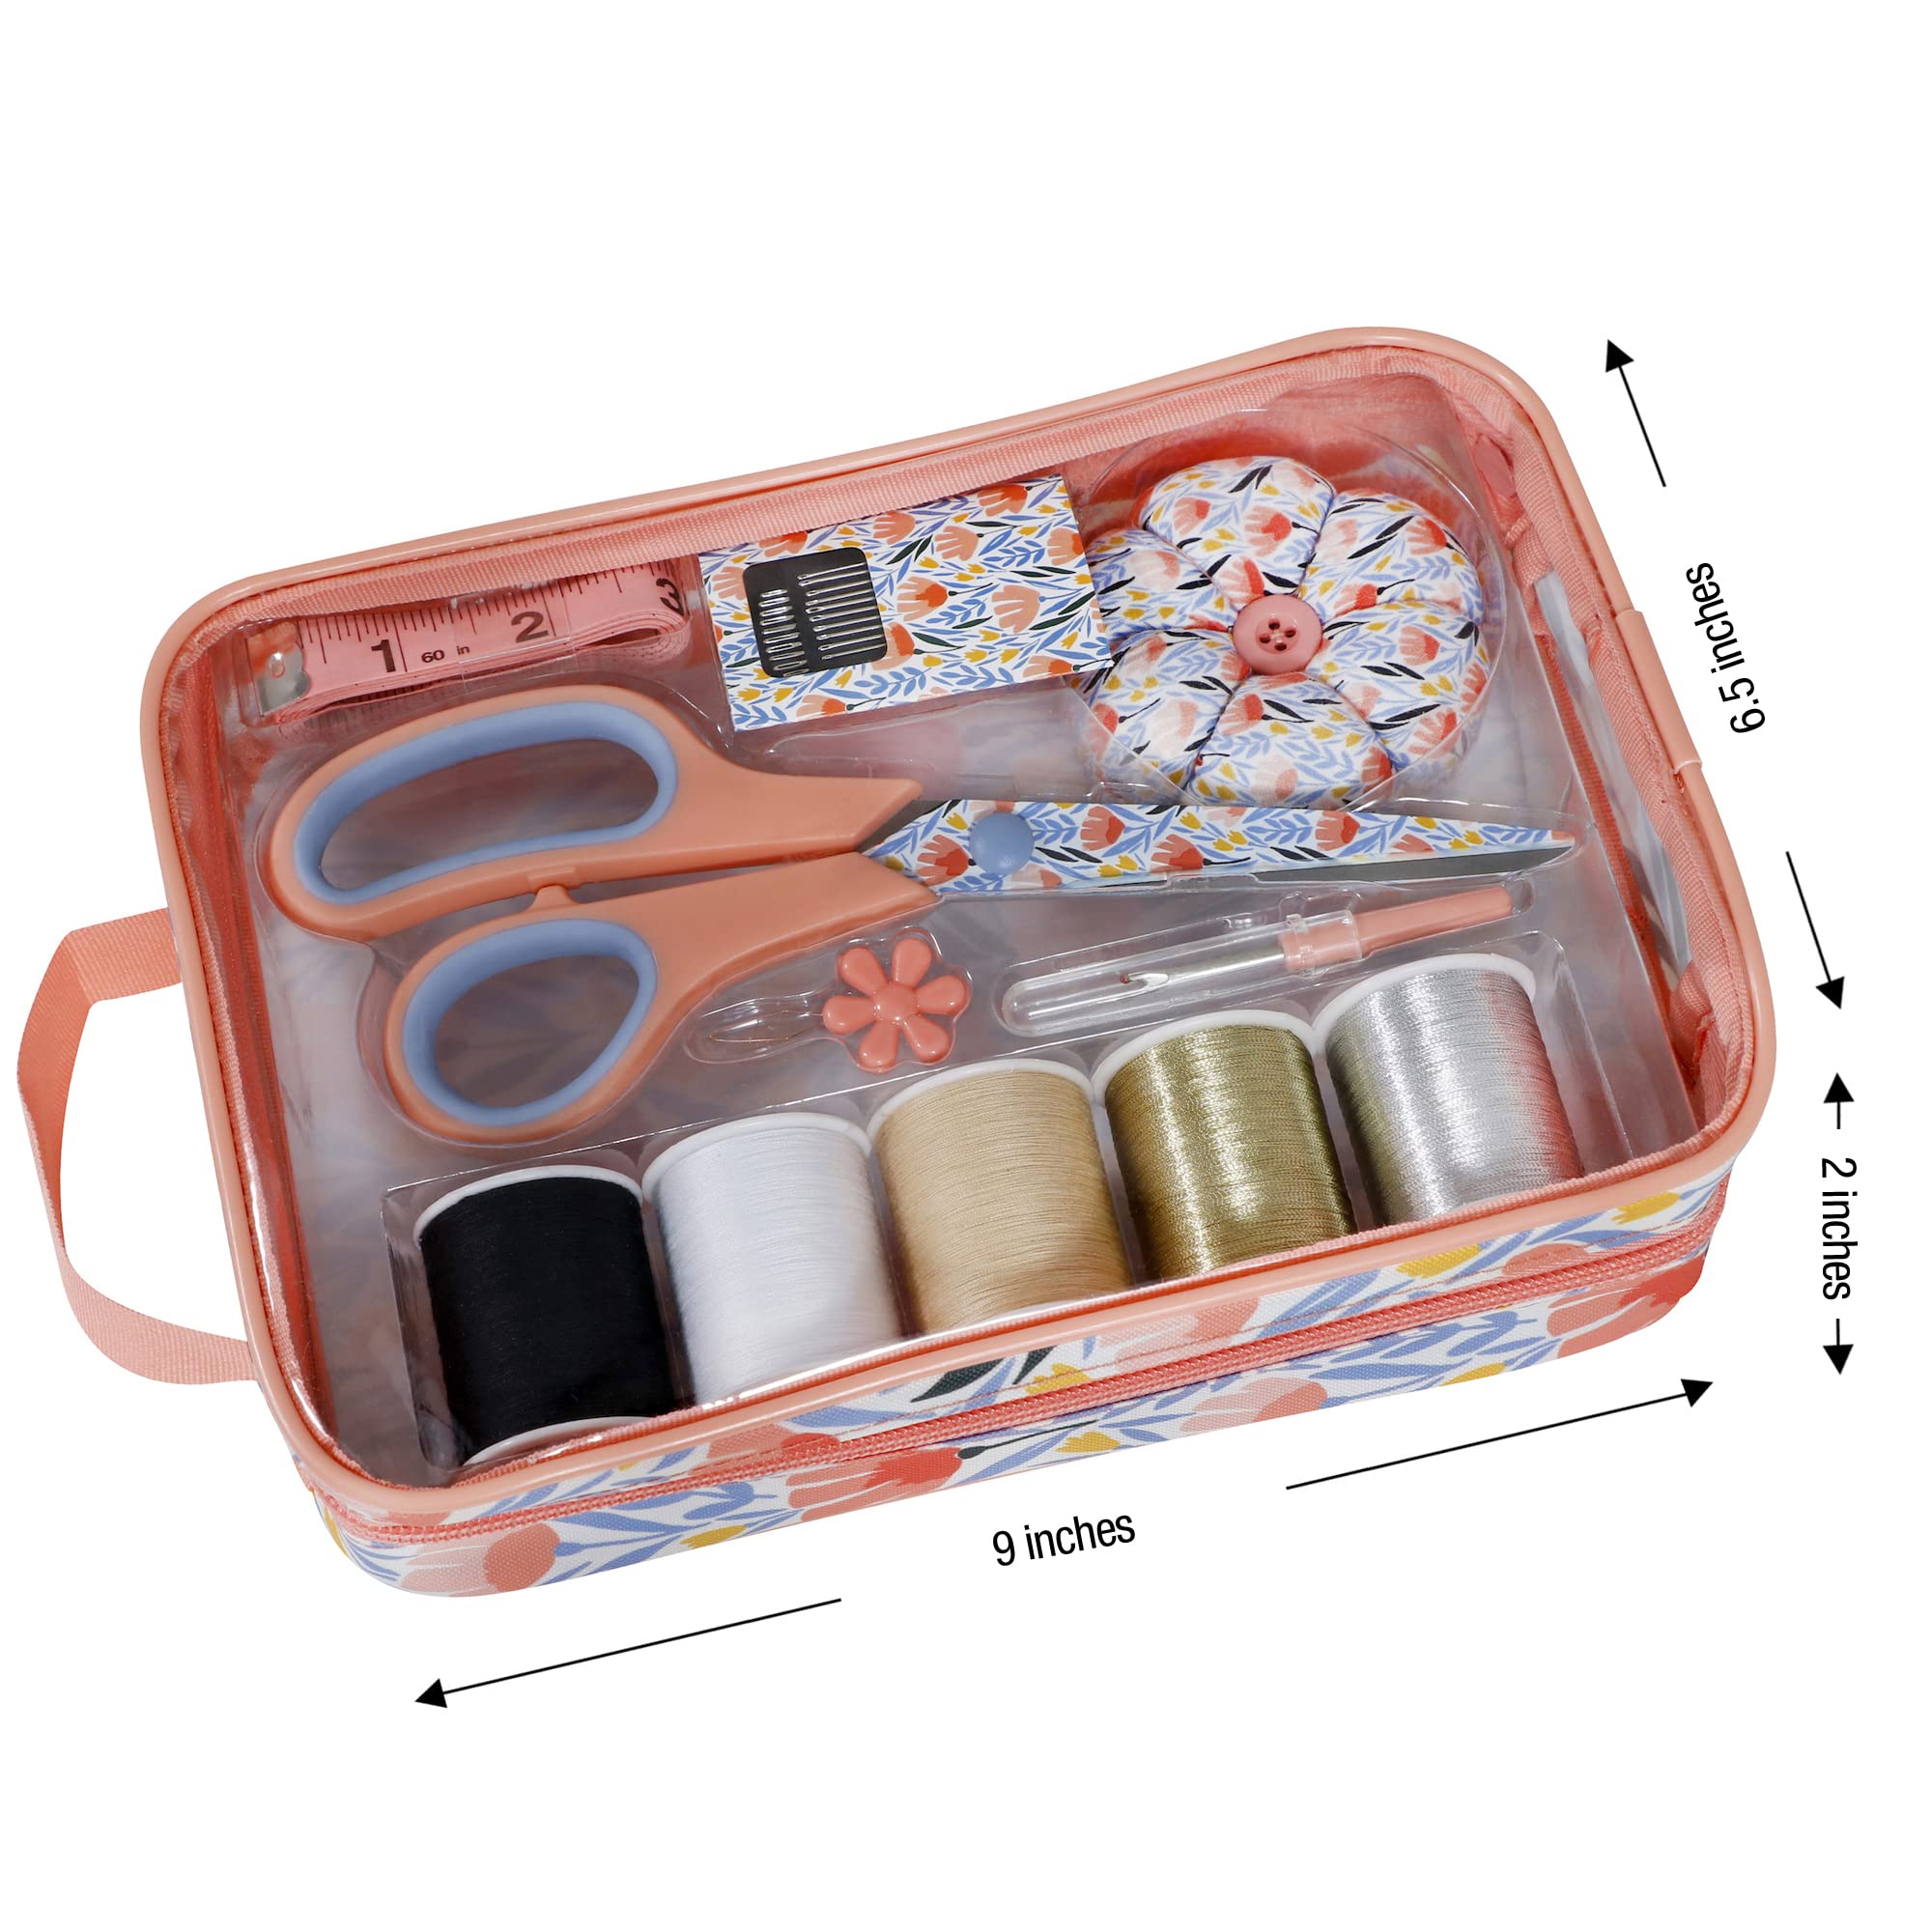 SINGER Sewing Kit in Tulip Floral Storage Bag with 30 Pcs Sewing Supplies for Emergency, Clothing Repair, Travel, Dormroom